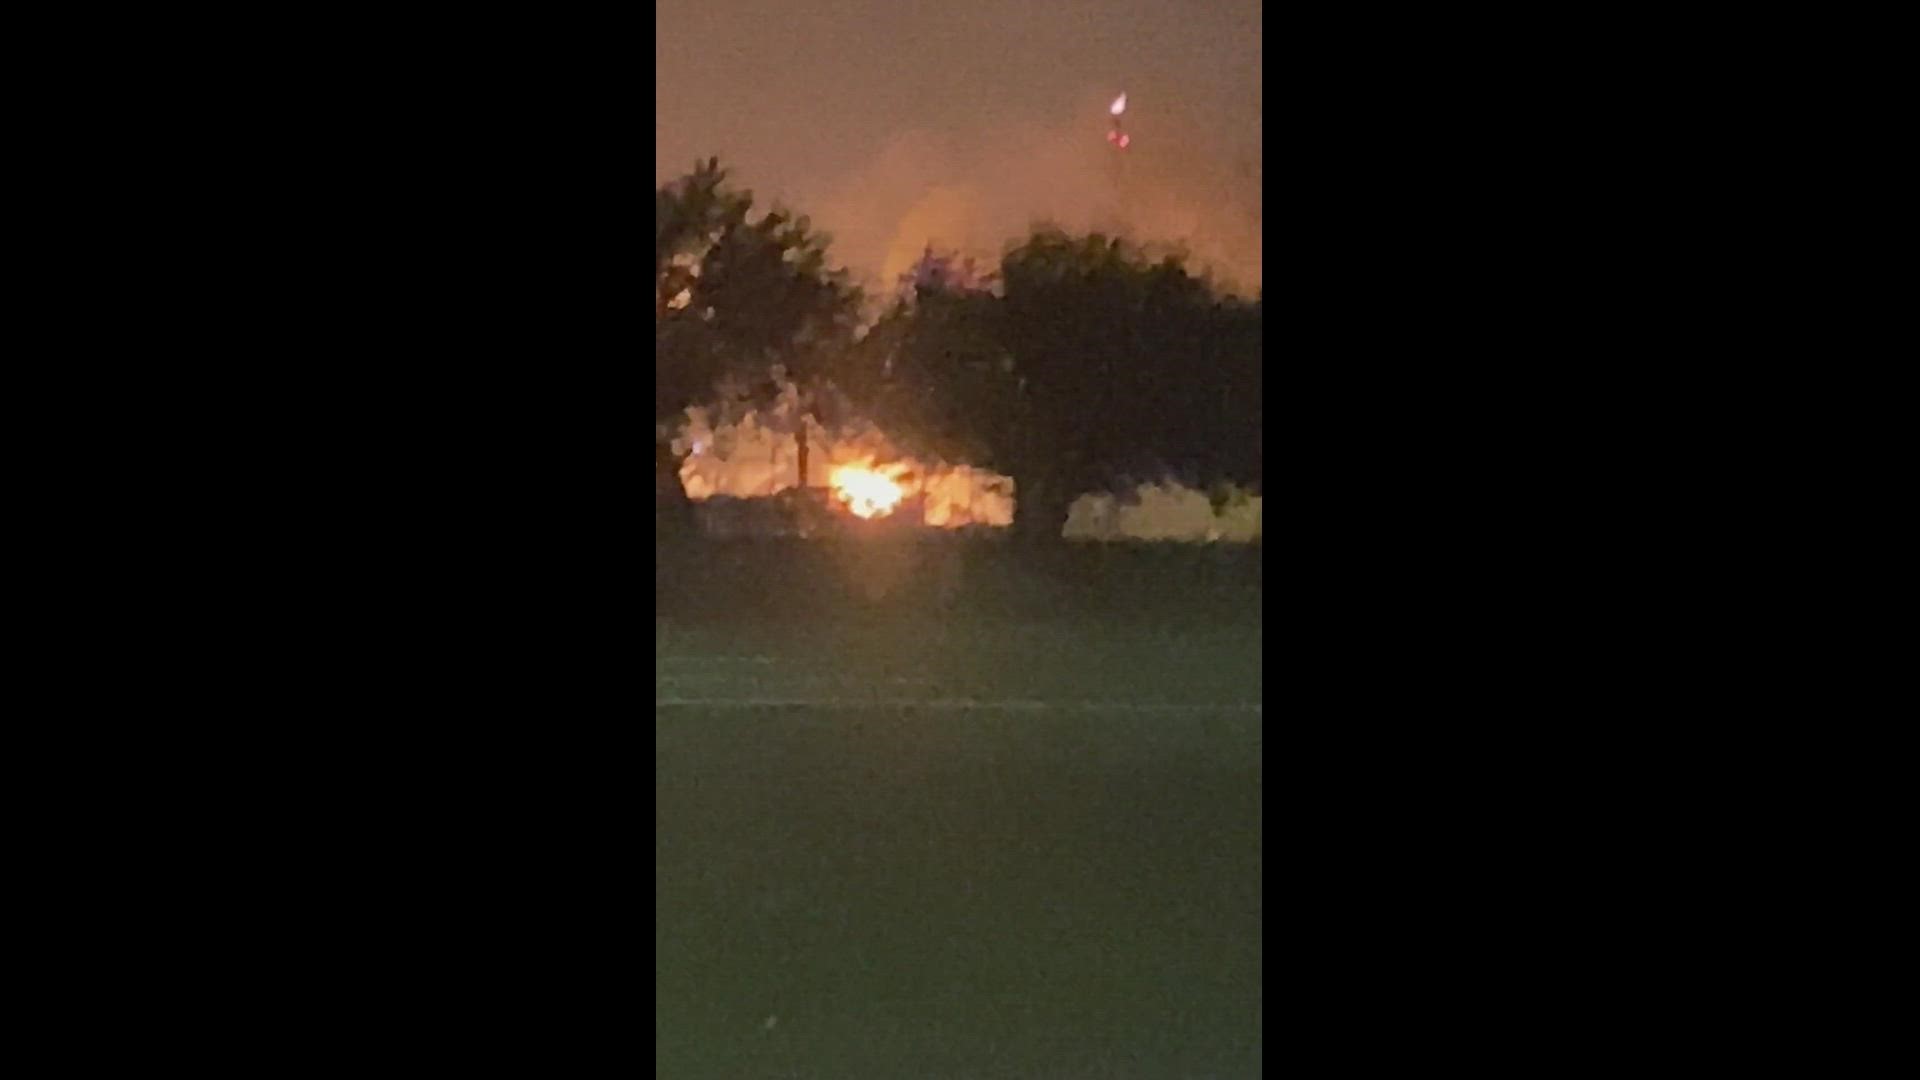 Fire at ExxonMobil plant. This video is from Mary Alaniz, who said it it shook her father's house. He lives in the Quail Hollow neighborhood.
Credit: Mary Alaniz